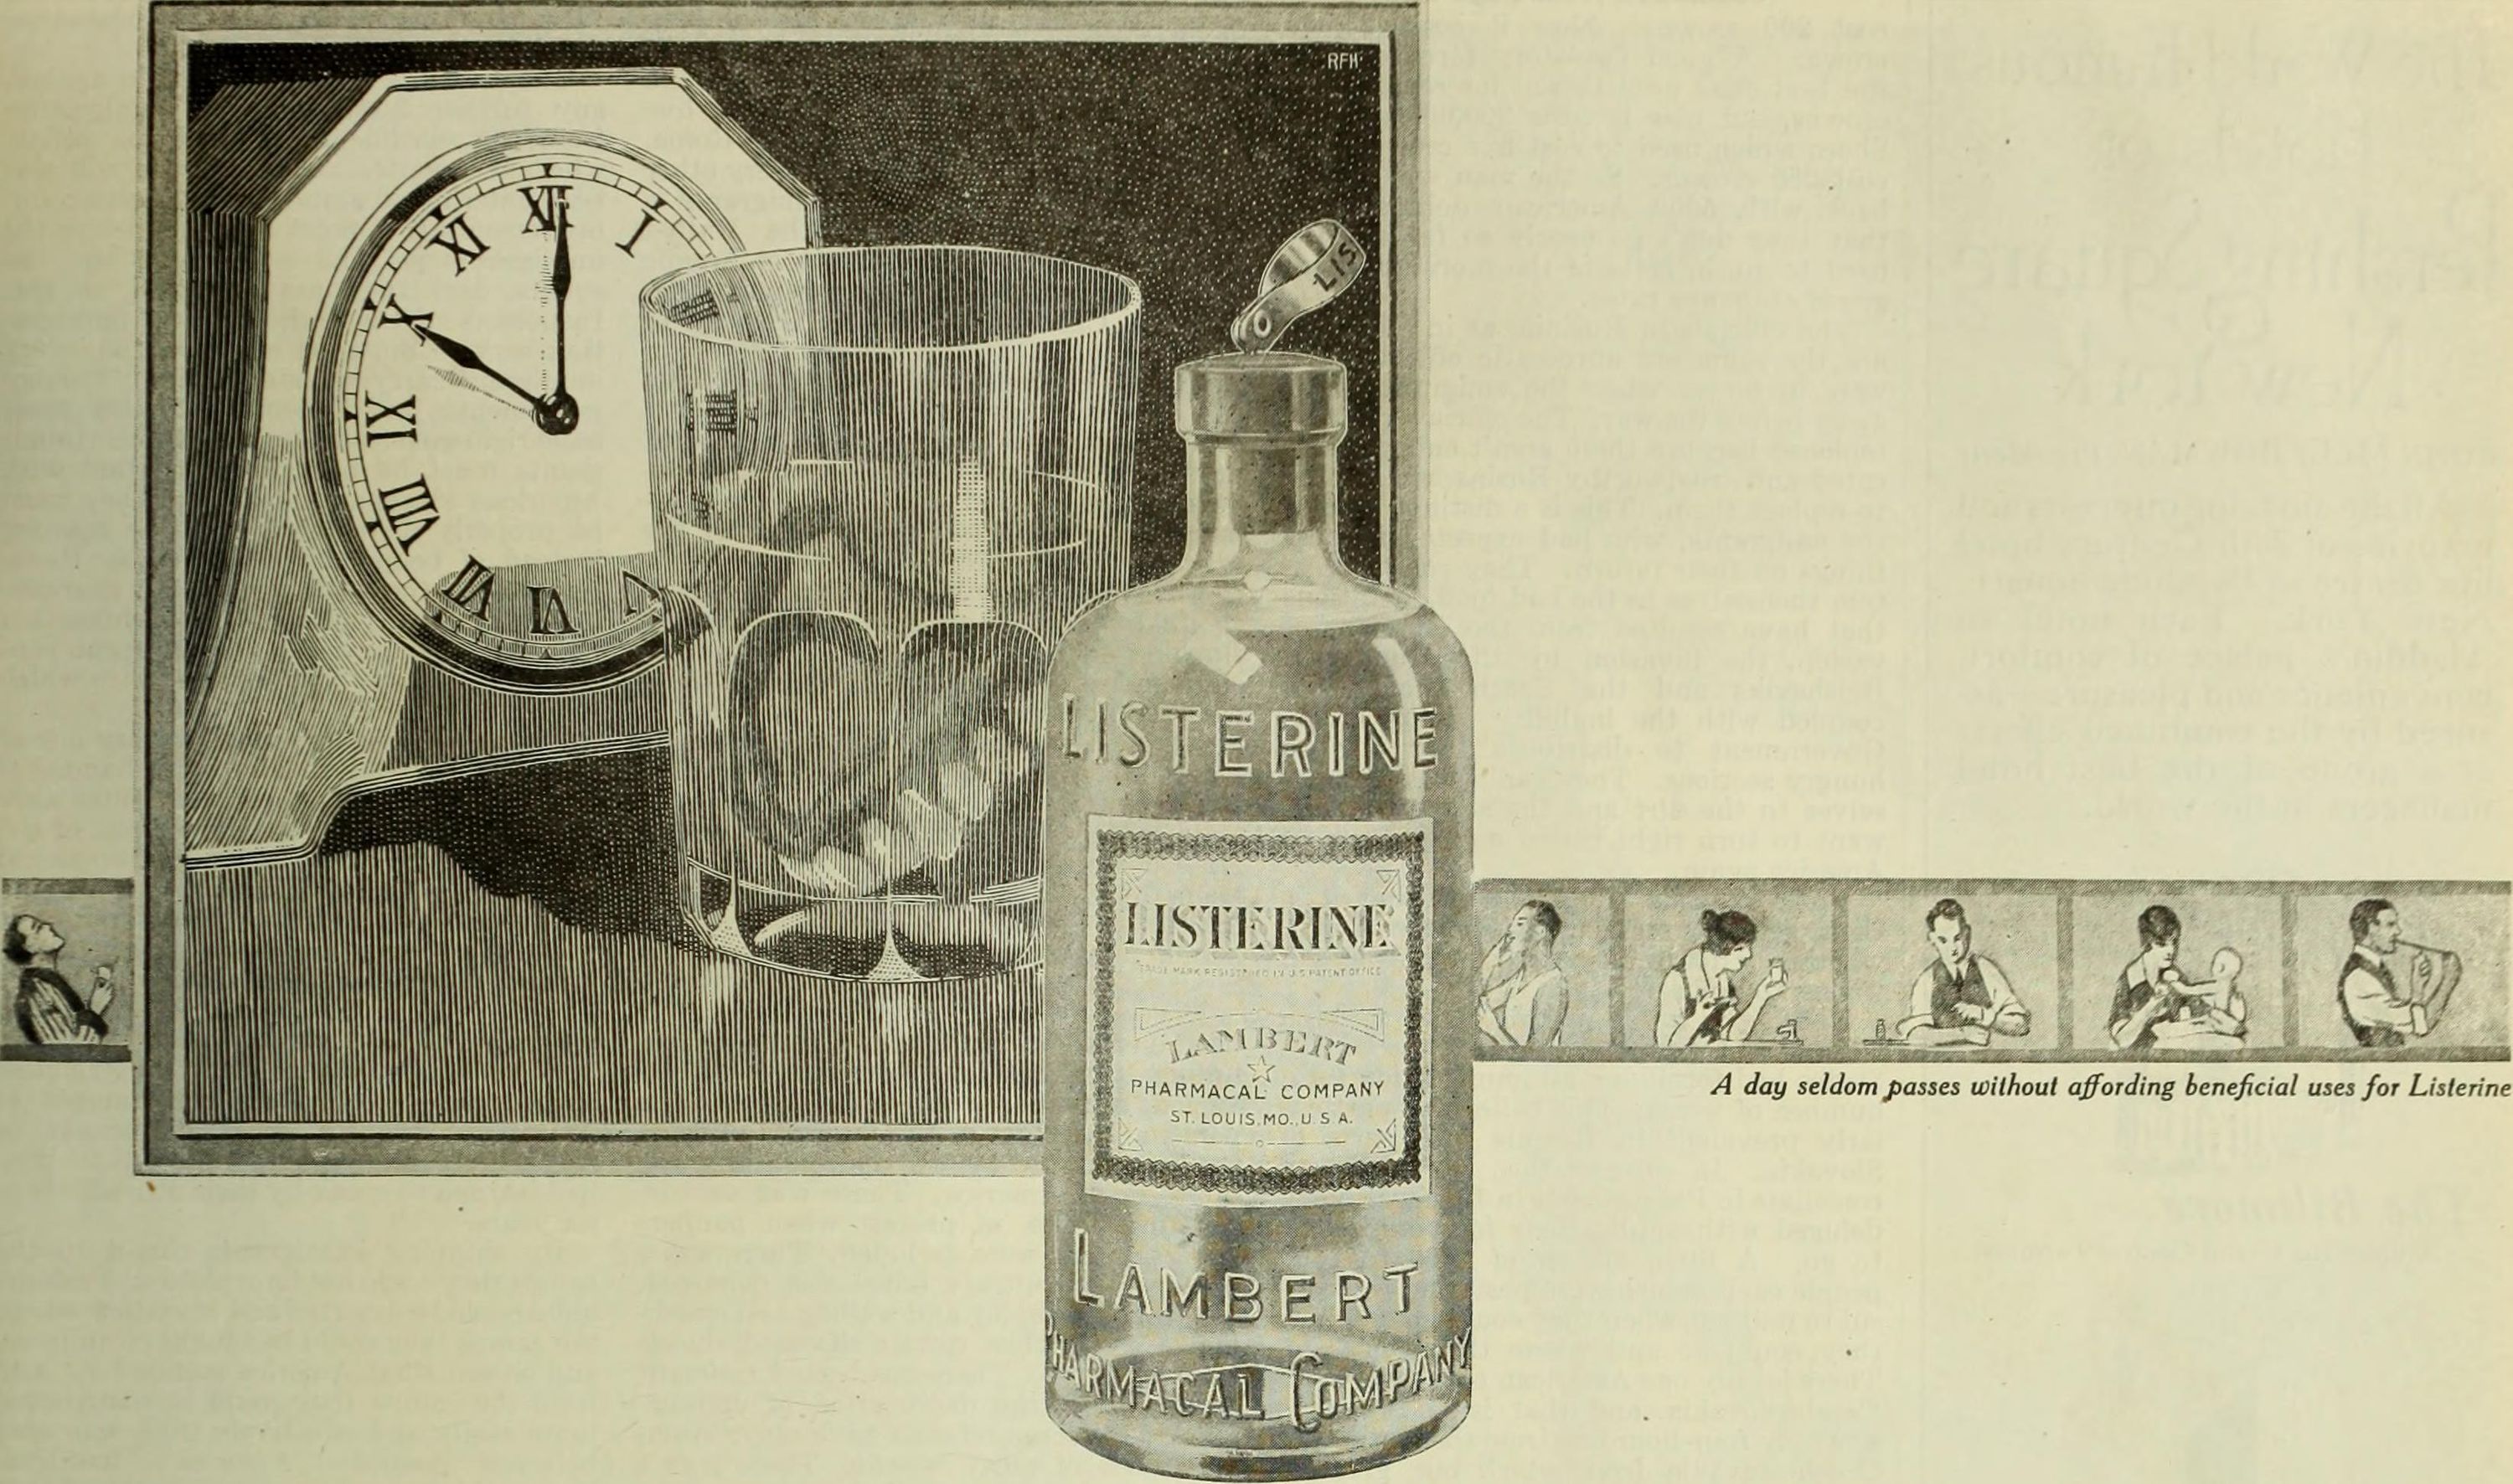 Image from “The Saturday evening post”